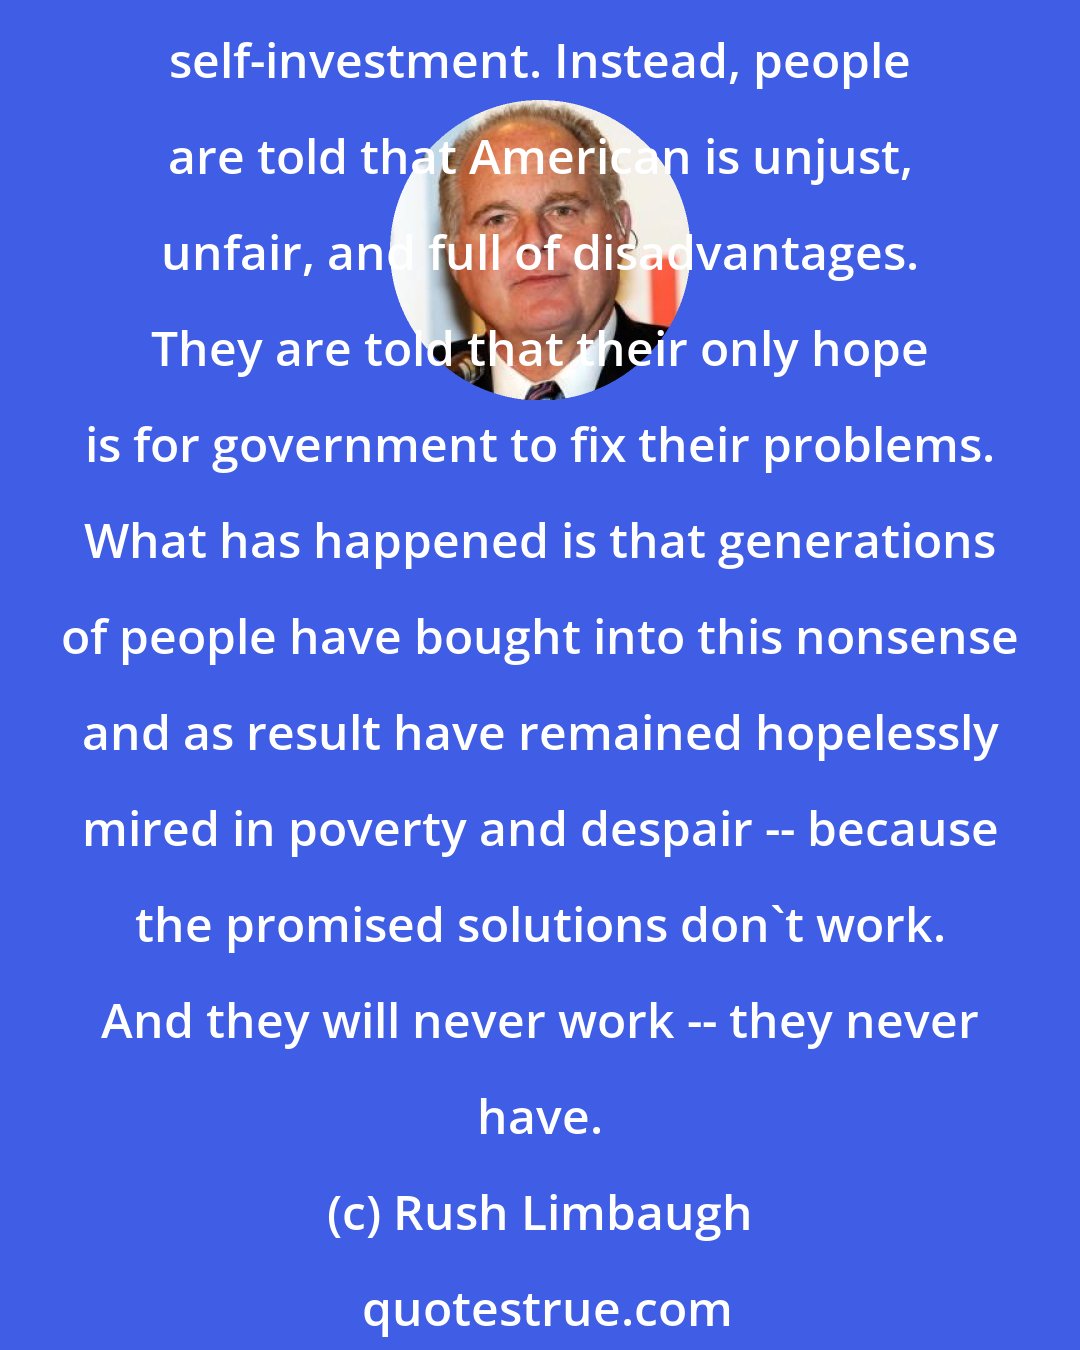 Rush Limbaugh: Liberals have created, and the minority leadership has exploited, a community of dependent people, unaware of the true route to prosperity and happiness: self-reliance and self-investment. Instead, people are told that American is unjust, unfair, and full of disadvantages. They are told that their only hope is for government to fix their problems. What has happened is that generations of people have bought into this nonsense and as result have remained hopelessly mired in poverty and despair -- because the promised solutions don't work. And they will never work -- they never have.